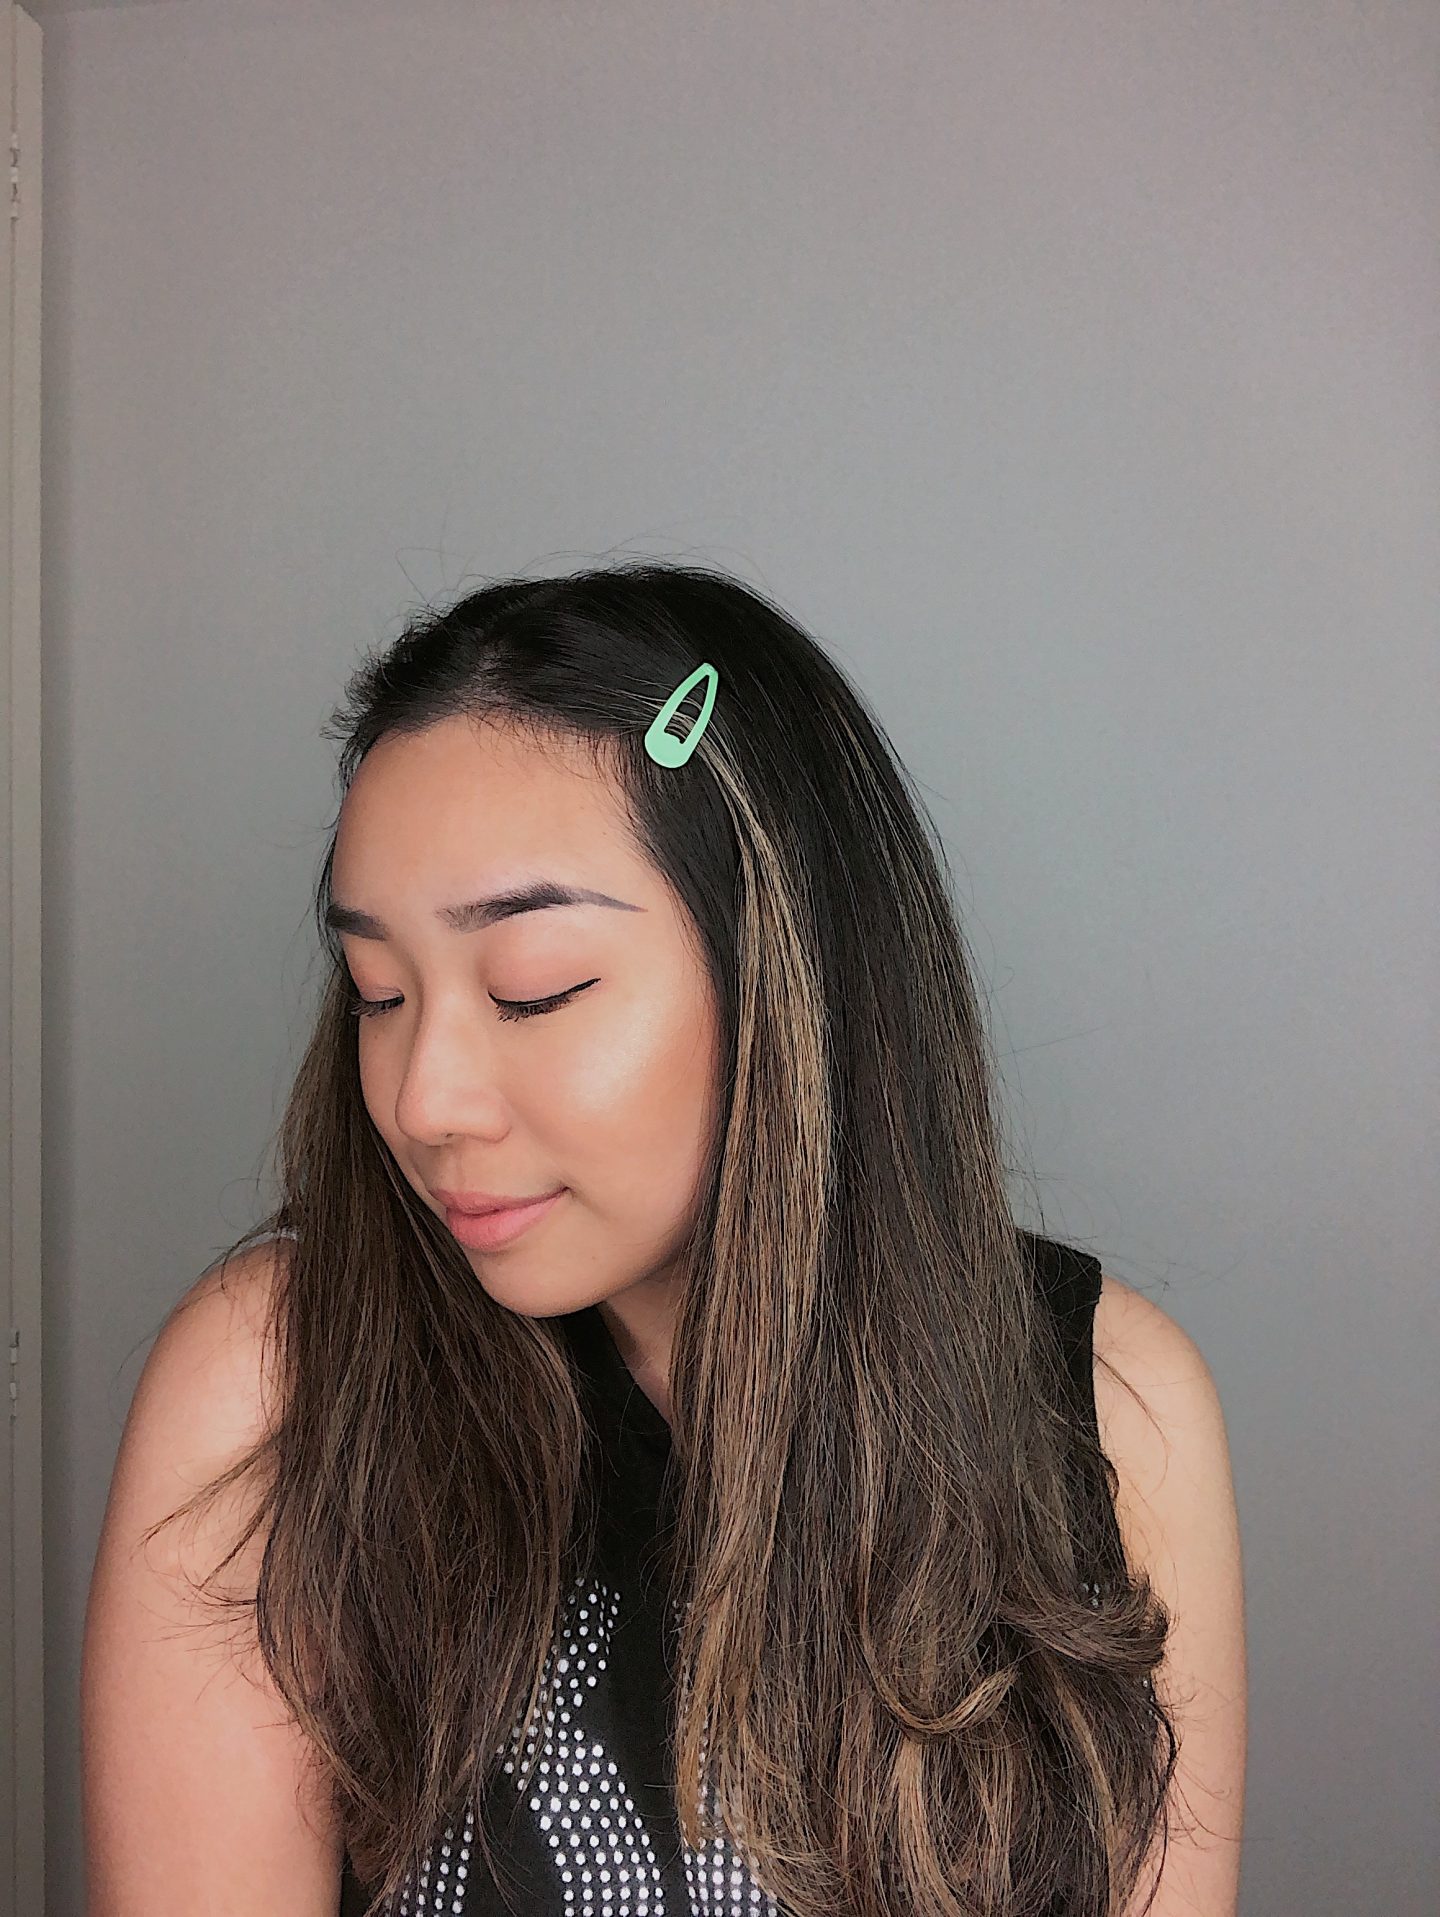 neon green hair clips to pull back my hair